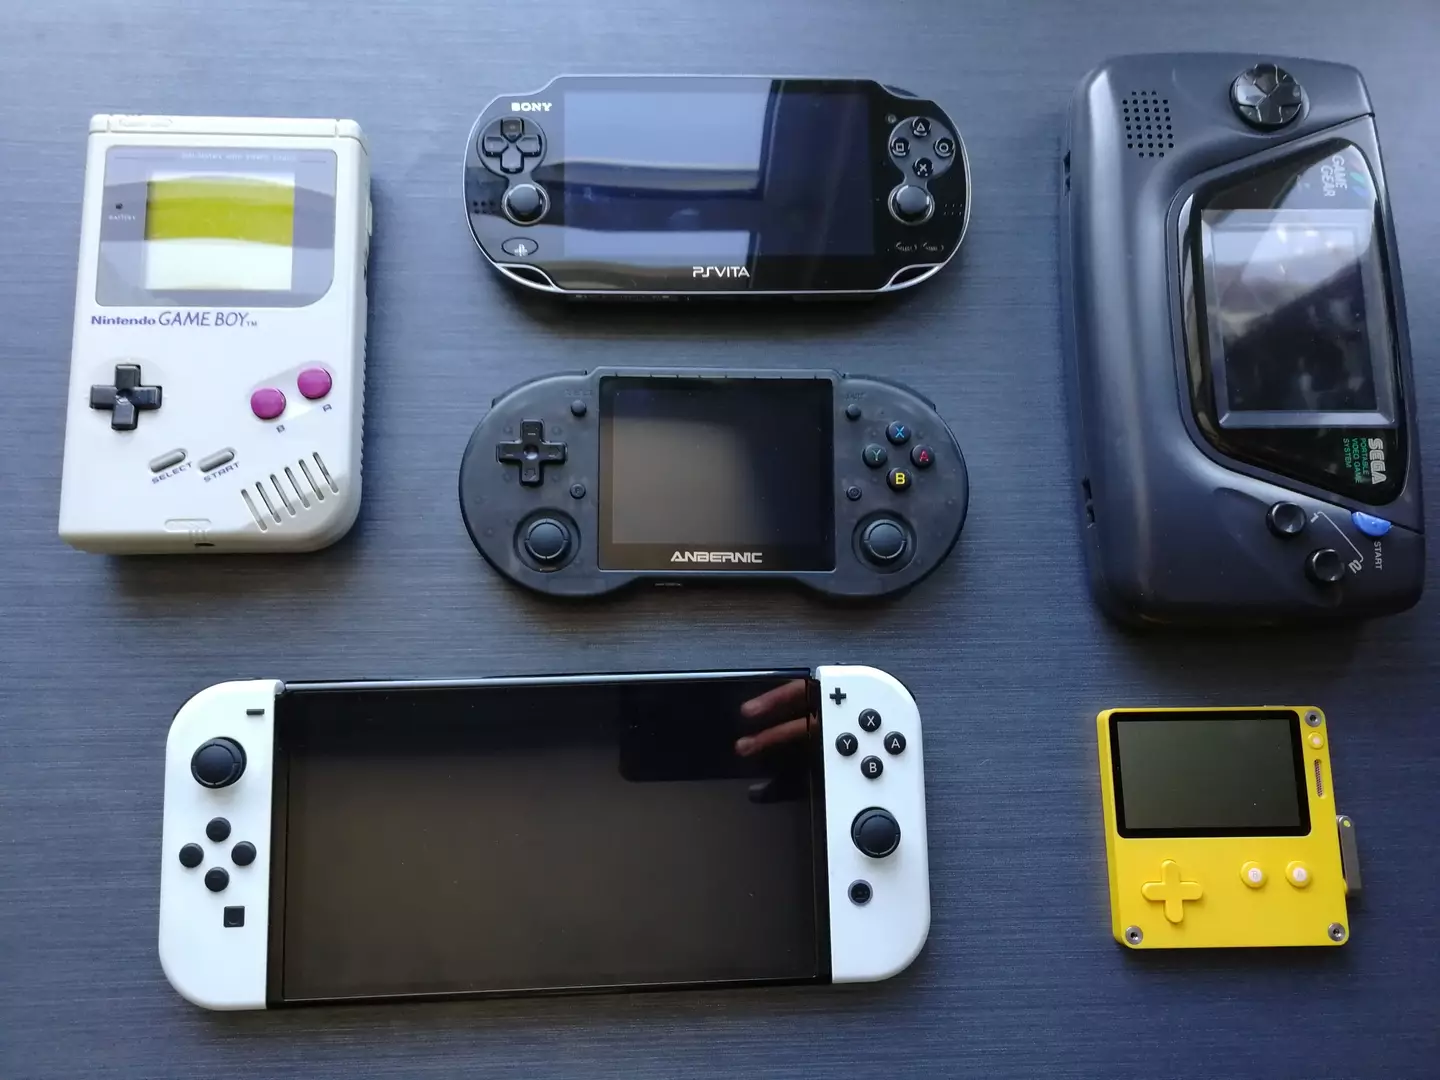 Here’s the RG353P beside some other, better-known handhelds